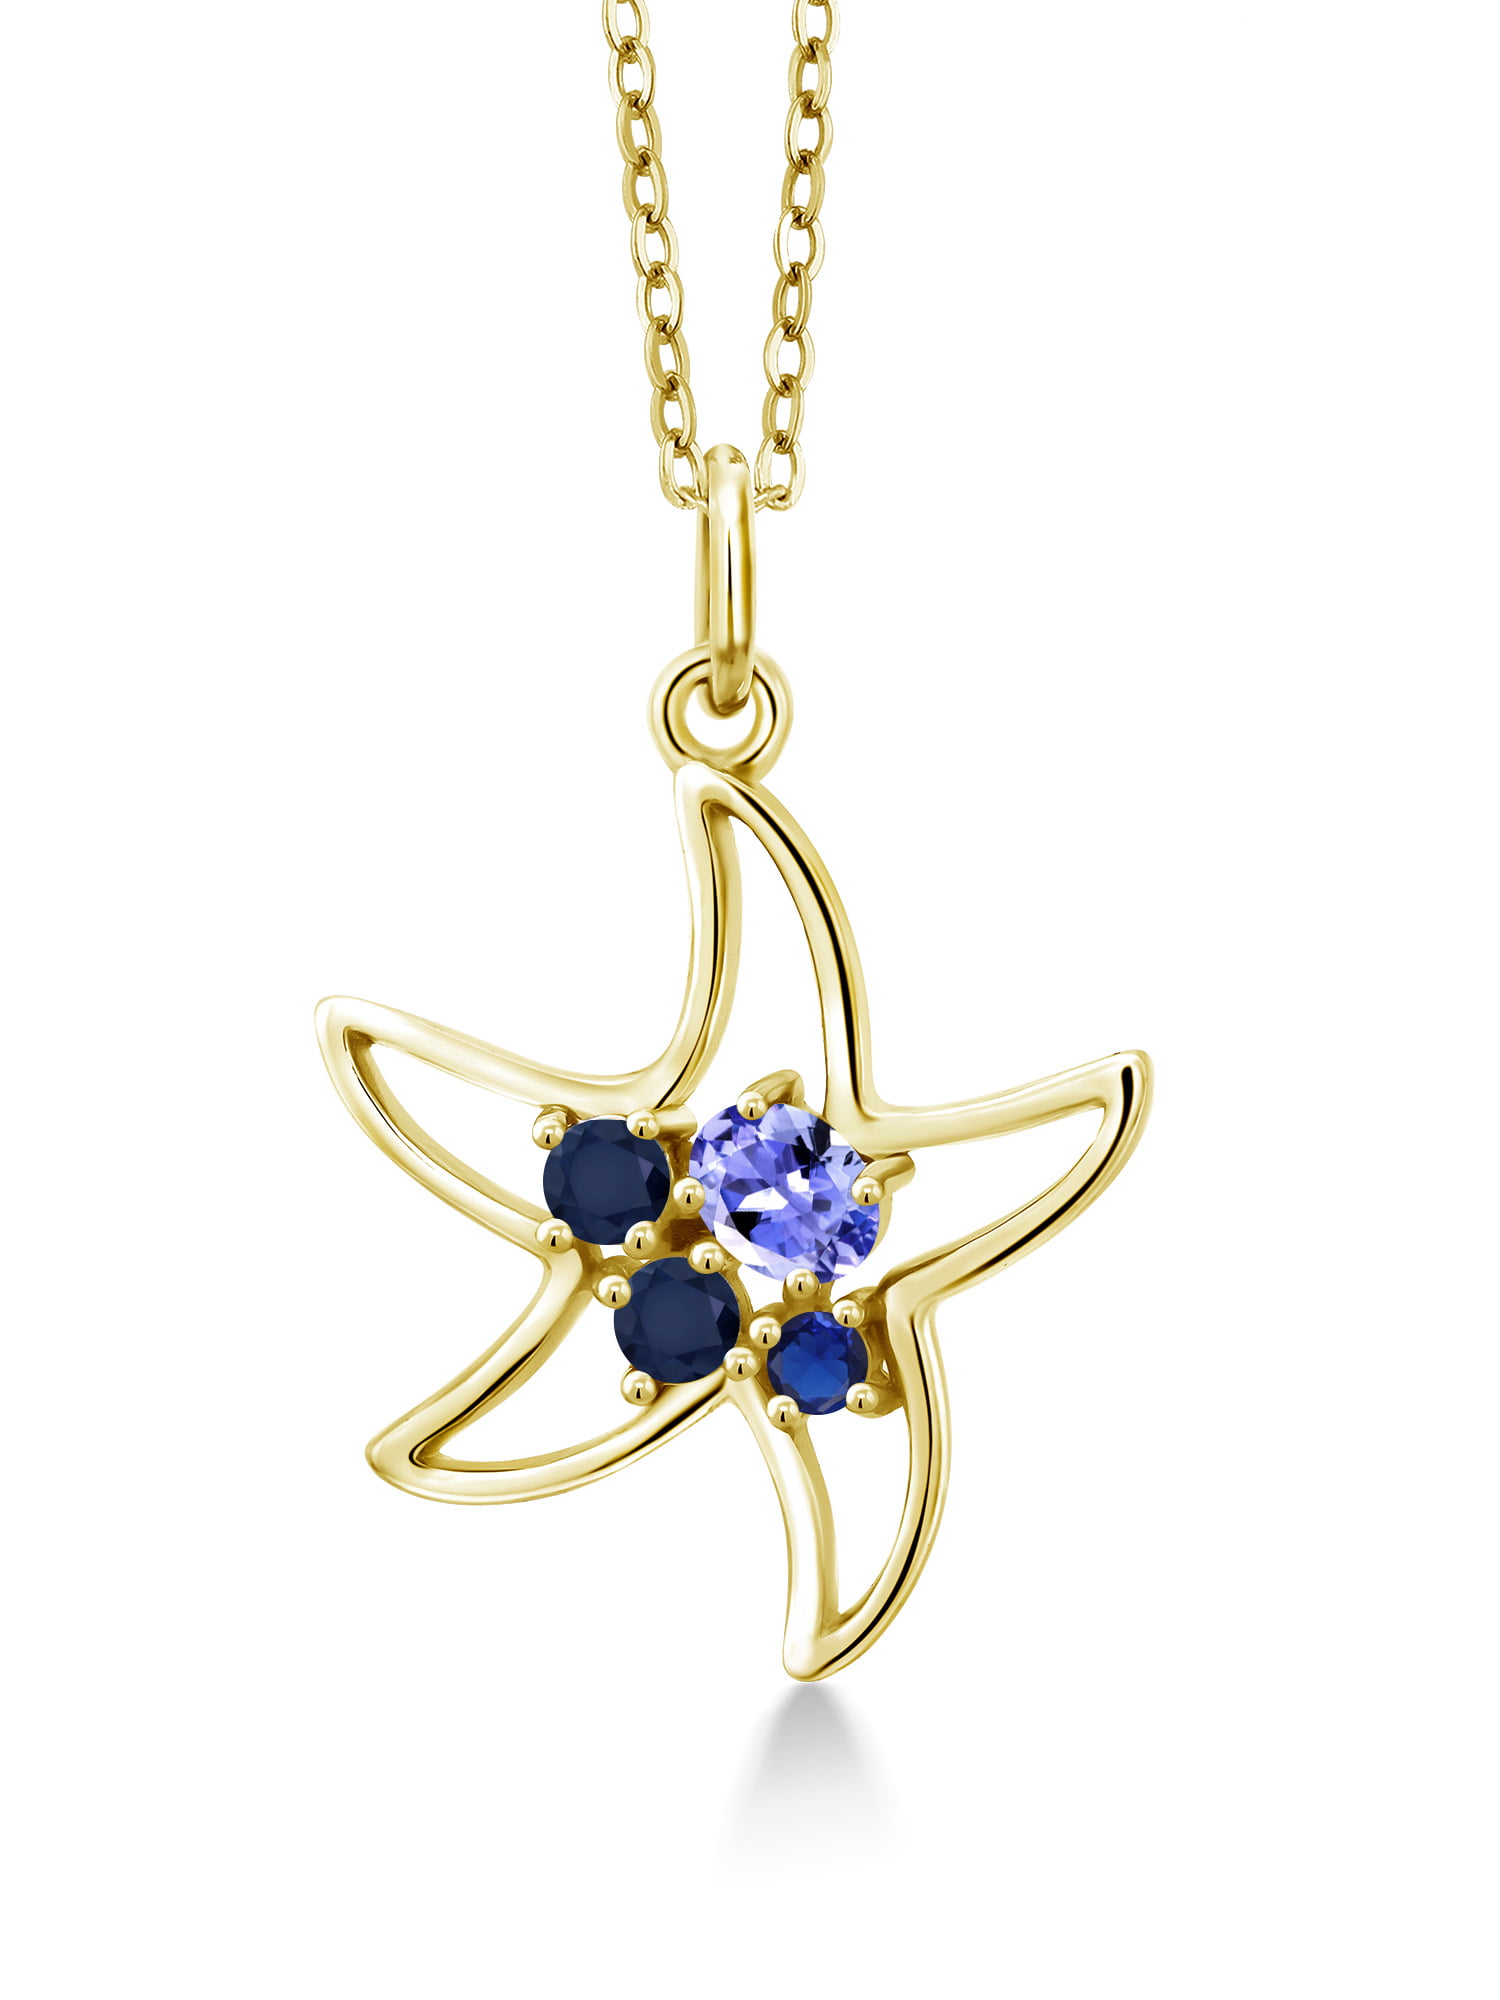 Gem Stone King 0.33 Ct Oval Blue Tanzanite Blue Sapphire 925 Sterling Silver Starfish Necklace